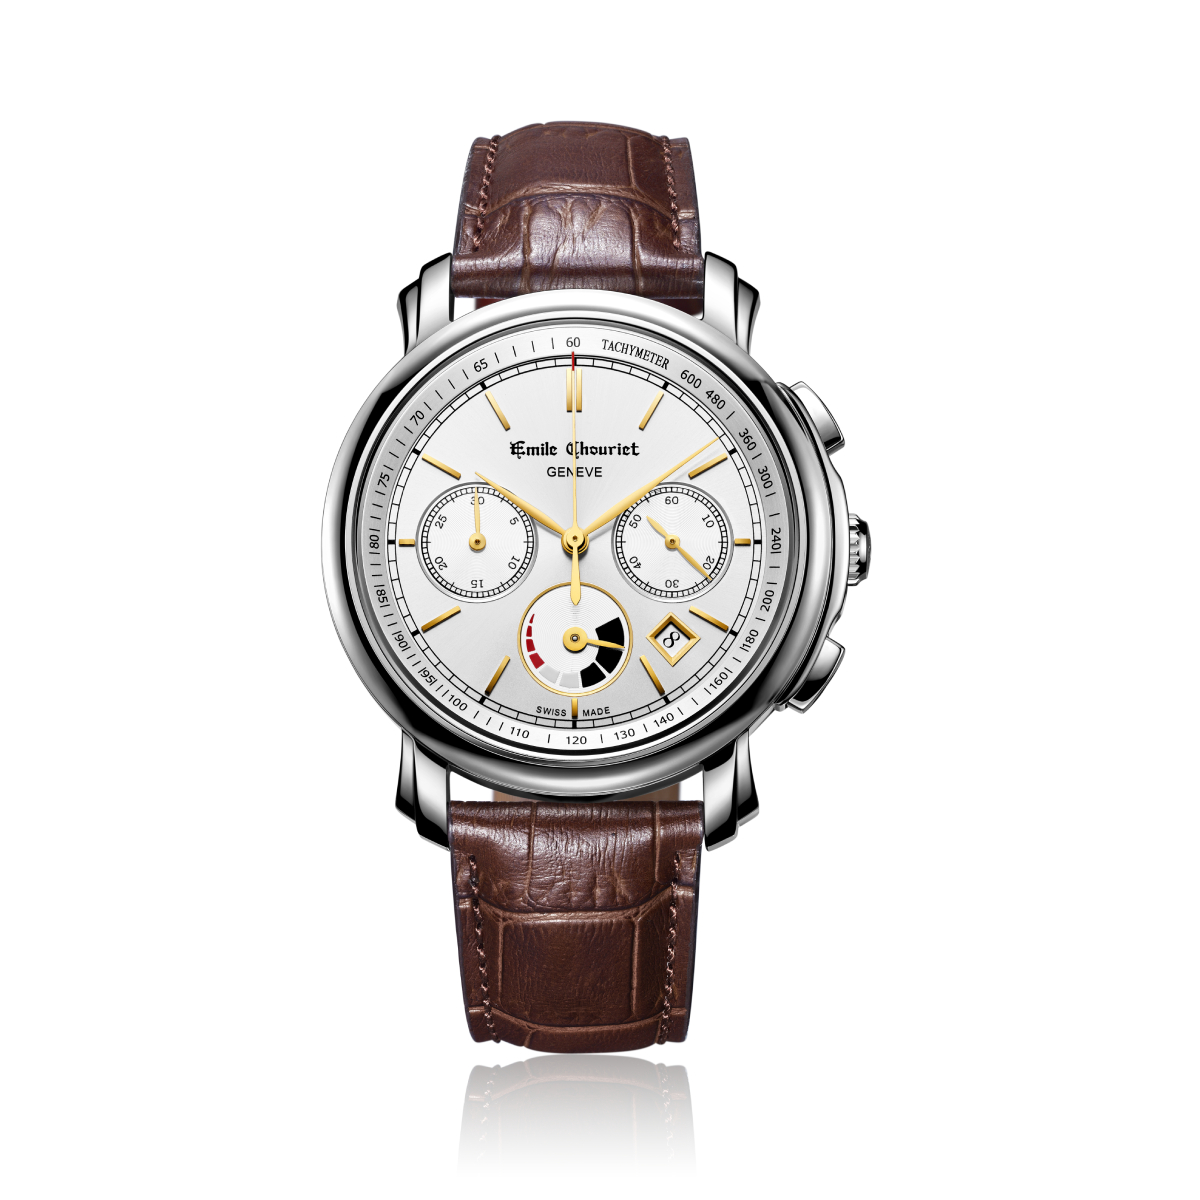 EMILE CHOURIET Gents Automatic Chronograph Watch 16.1168.G42.6.8.28.2 - front view